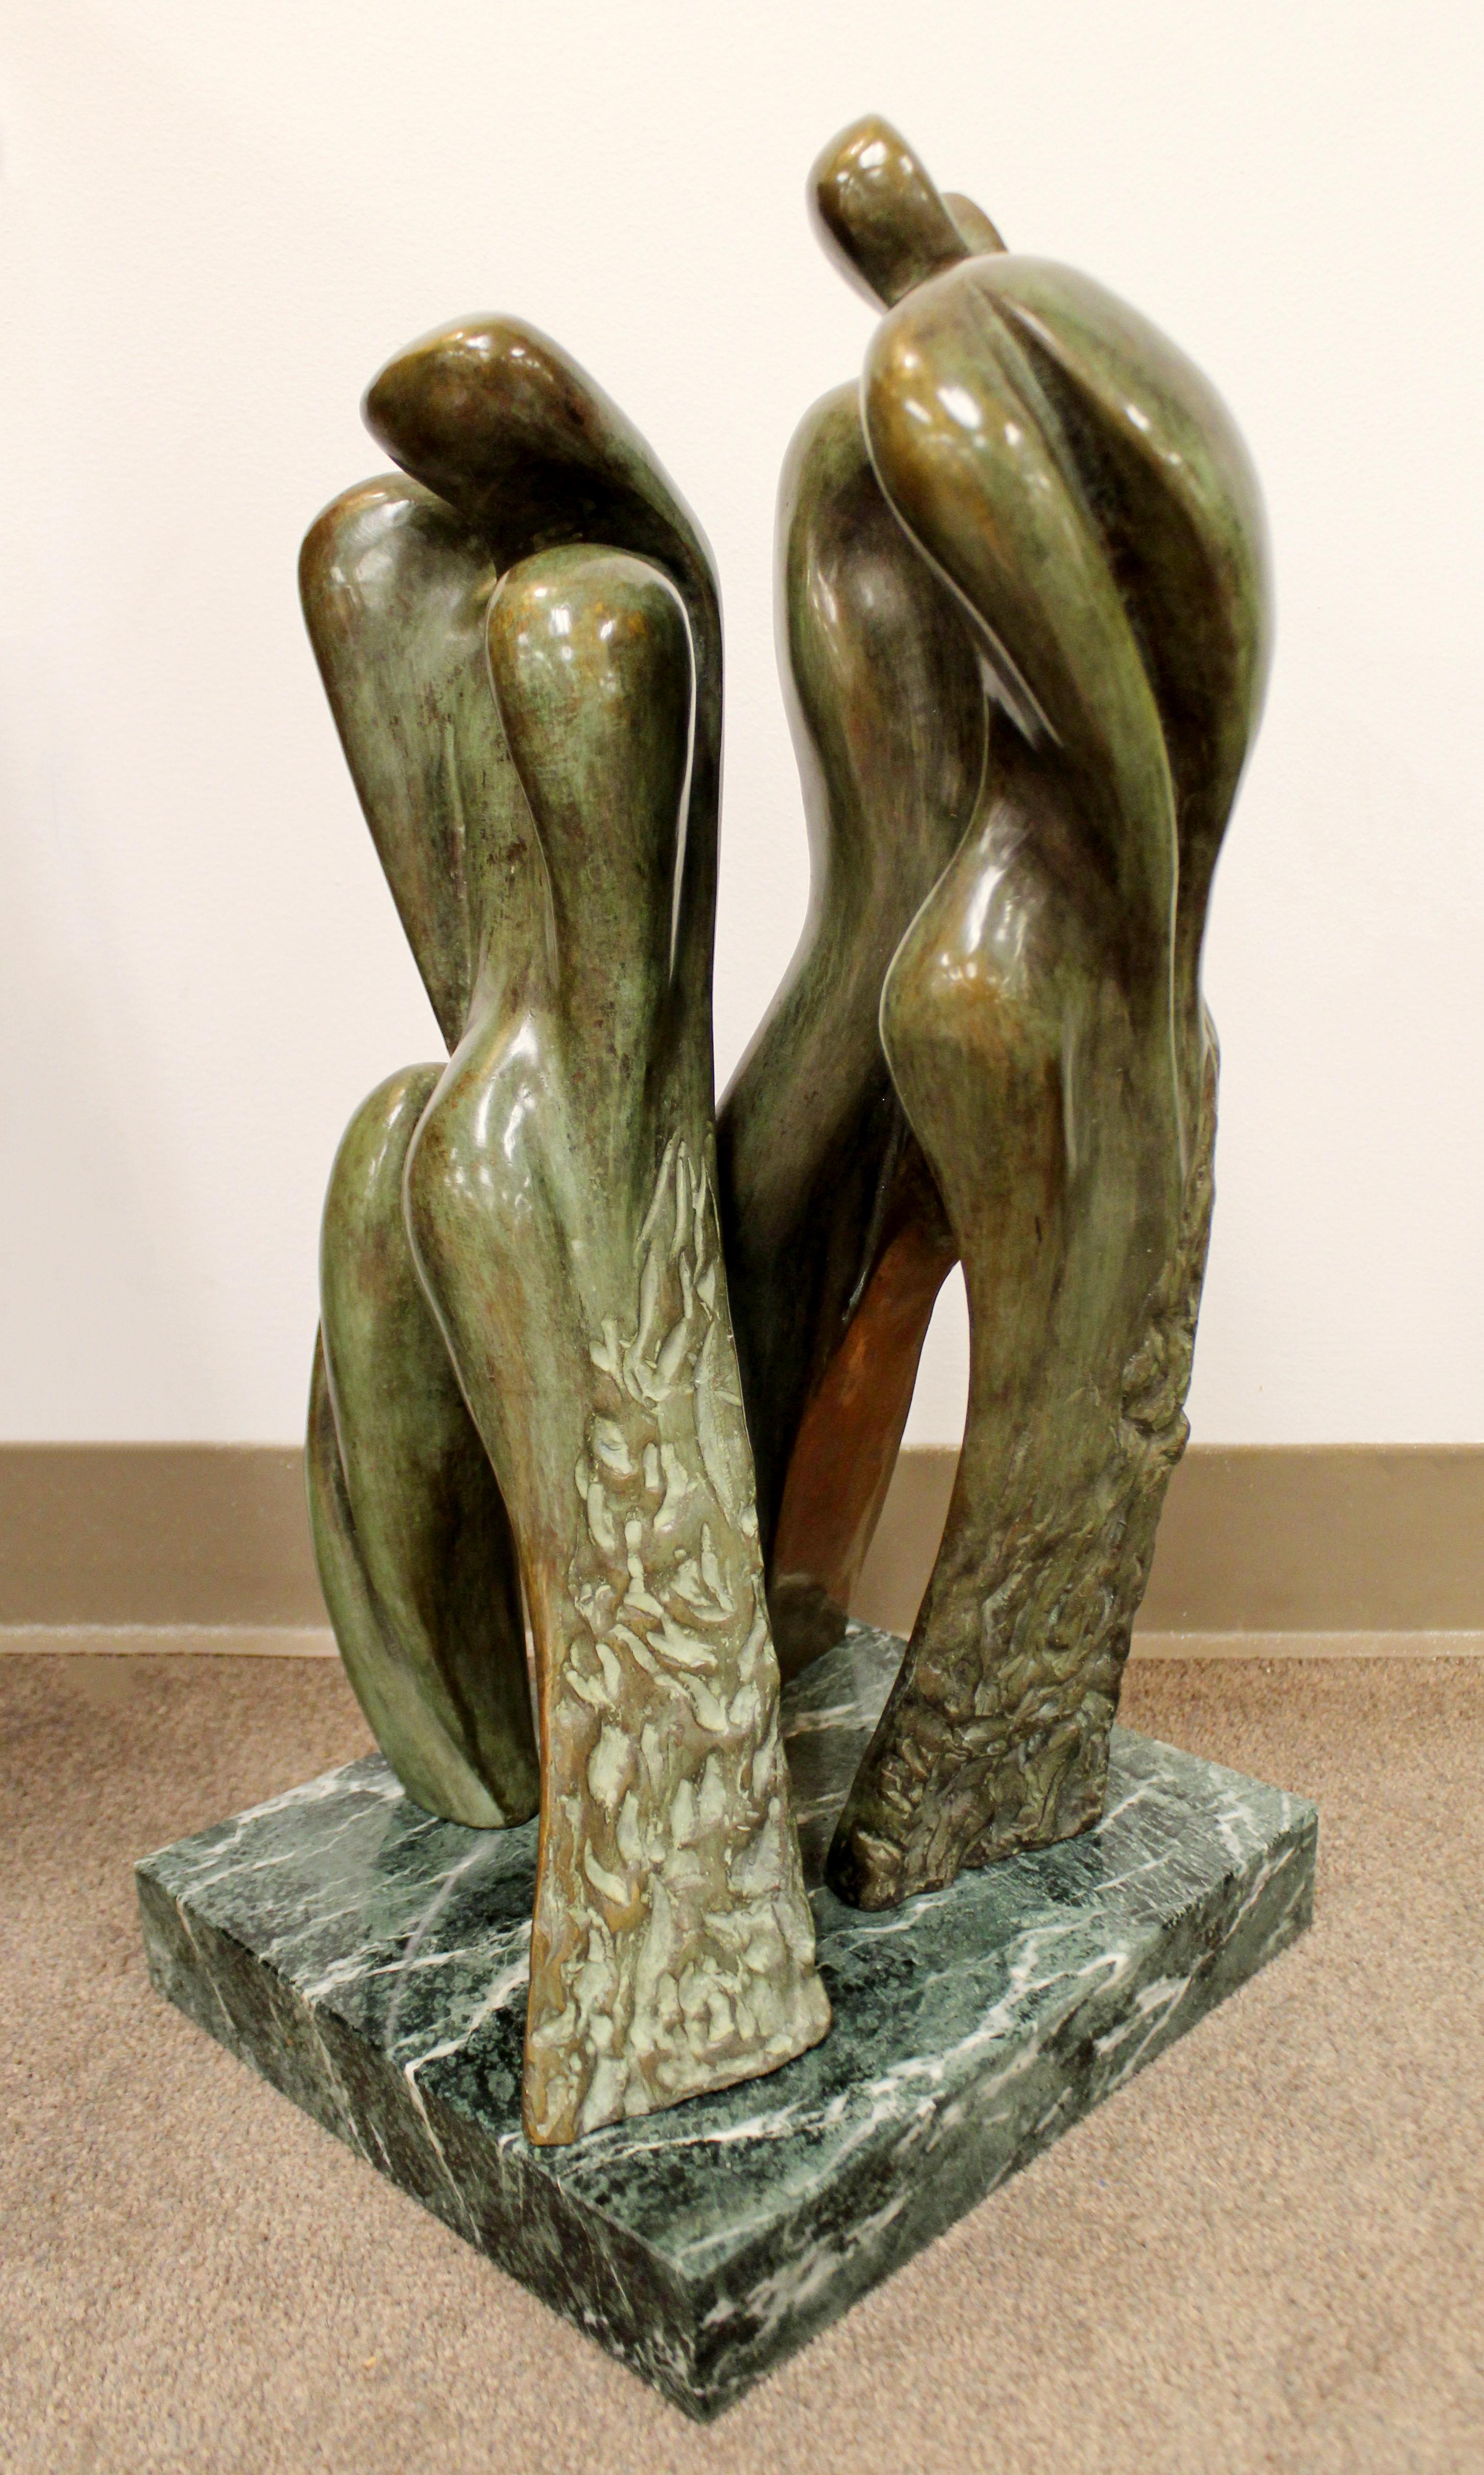 For your consideration is a gorgeous, bronze table sculpture, 